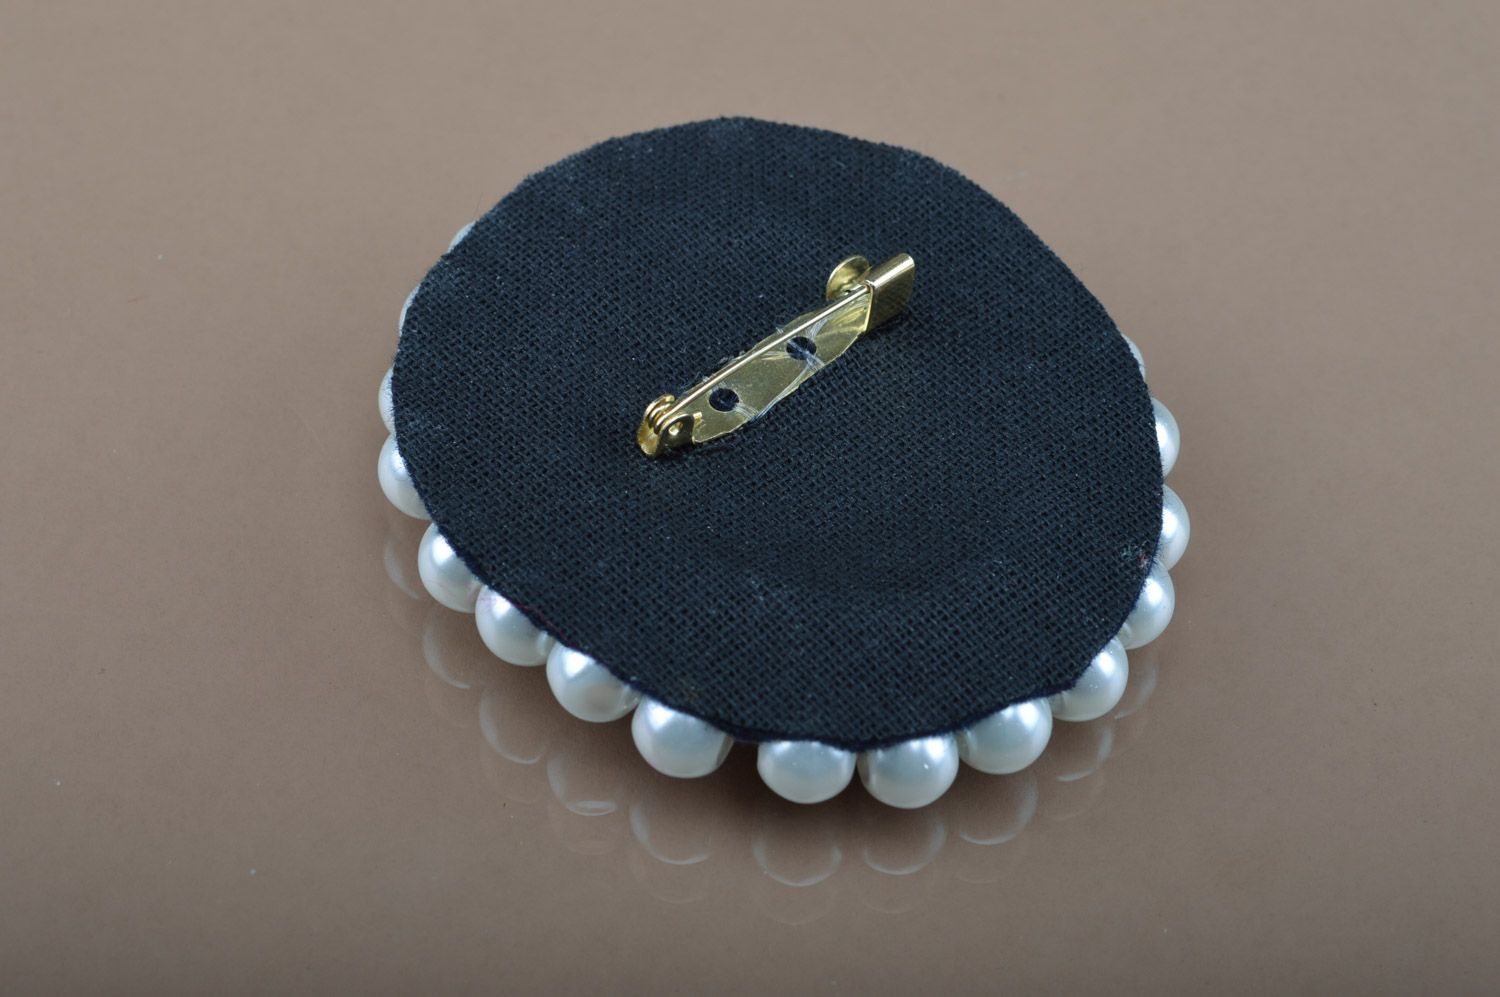 Handmade felt brooch with cameo embroidered with seed and pearl-like beads photo 3